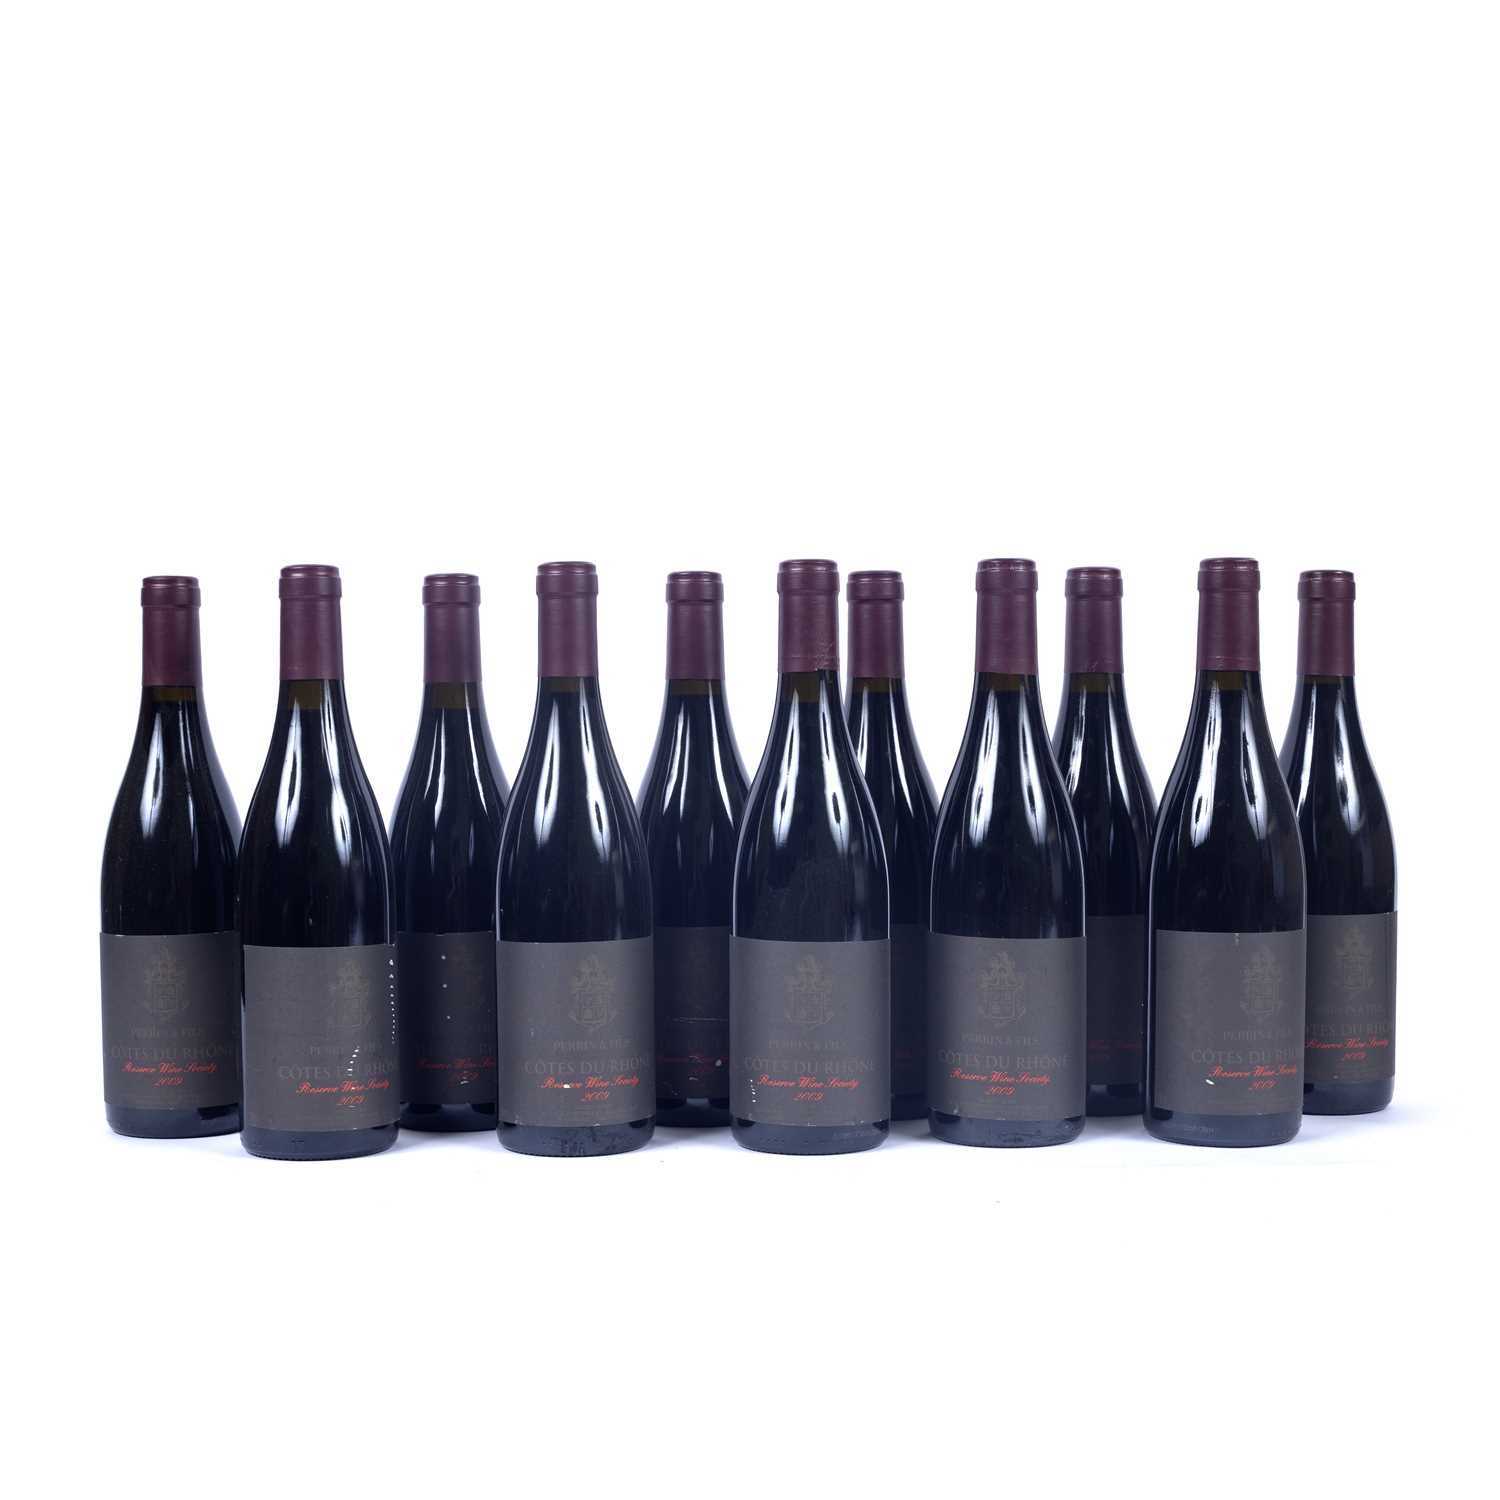 Eleven bottles of Perrin & Fils Cotes Du Rhone, Reserve Wine Society 2009Condition report: In good